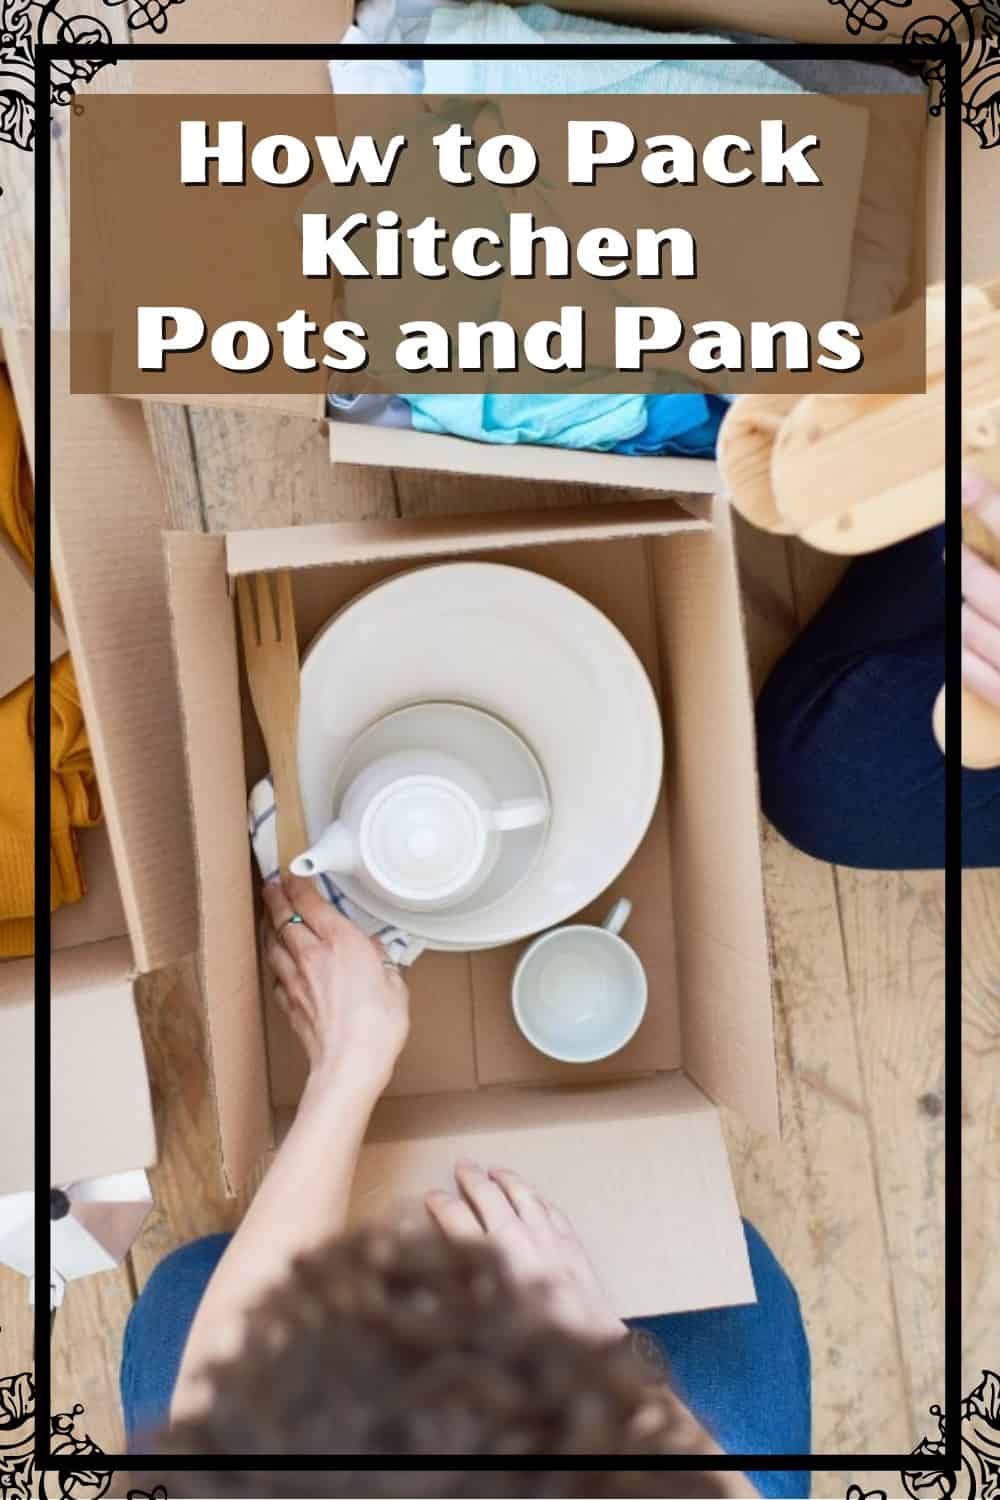 Understanding how to pack kitchen pots and pans when moving